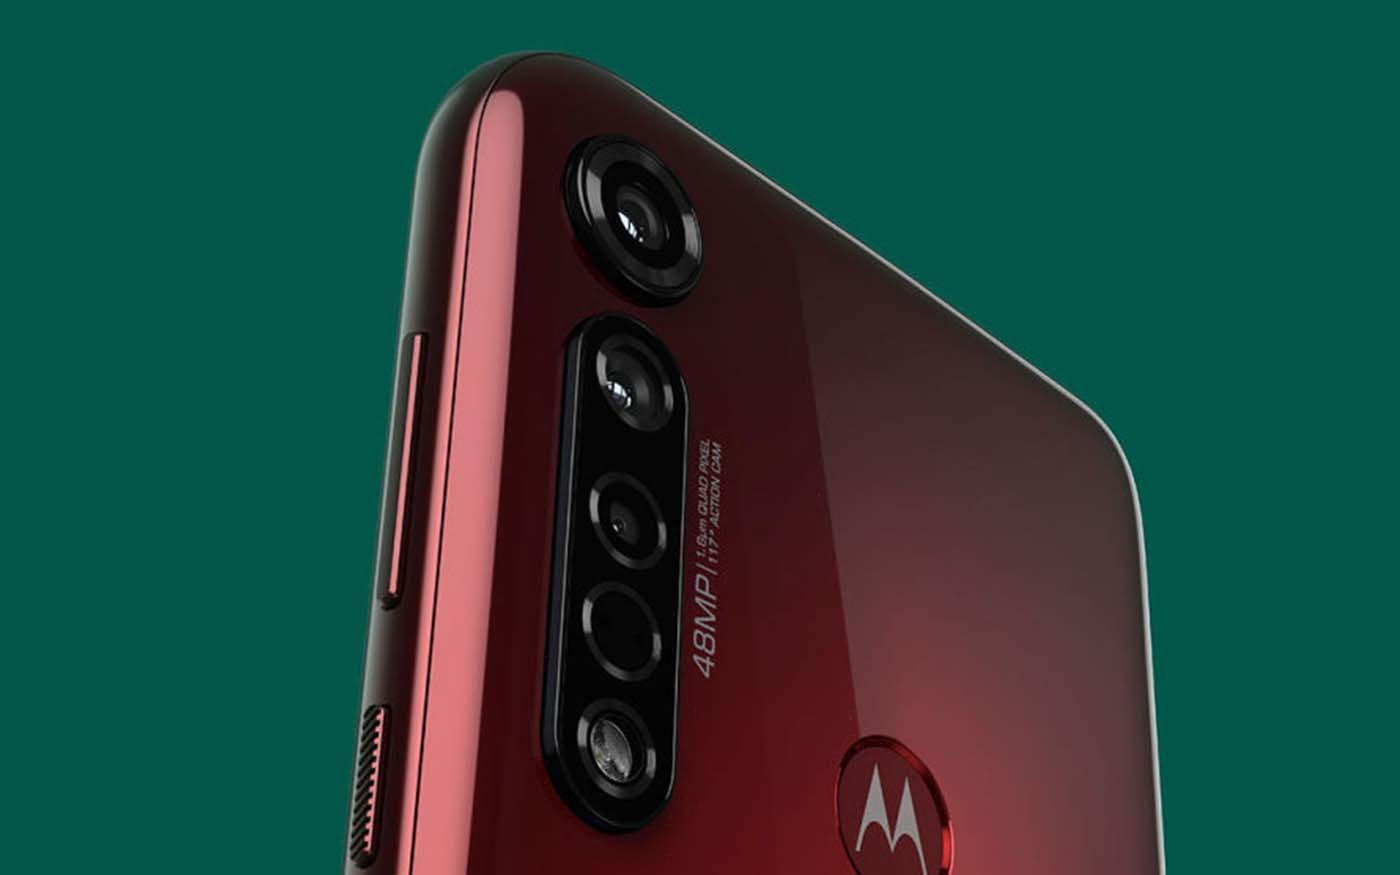 Leak specifications for Motorola Edge +, One Mind and Moto G8 Power Lite